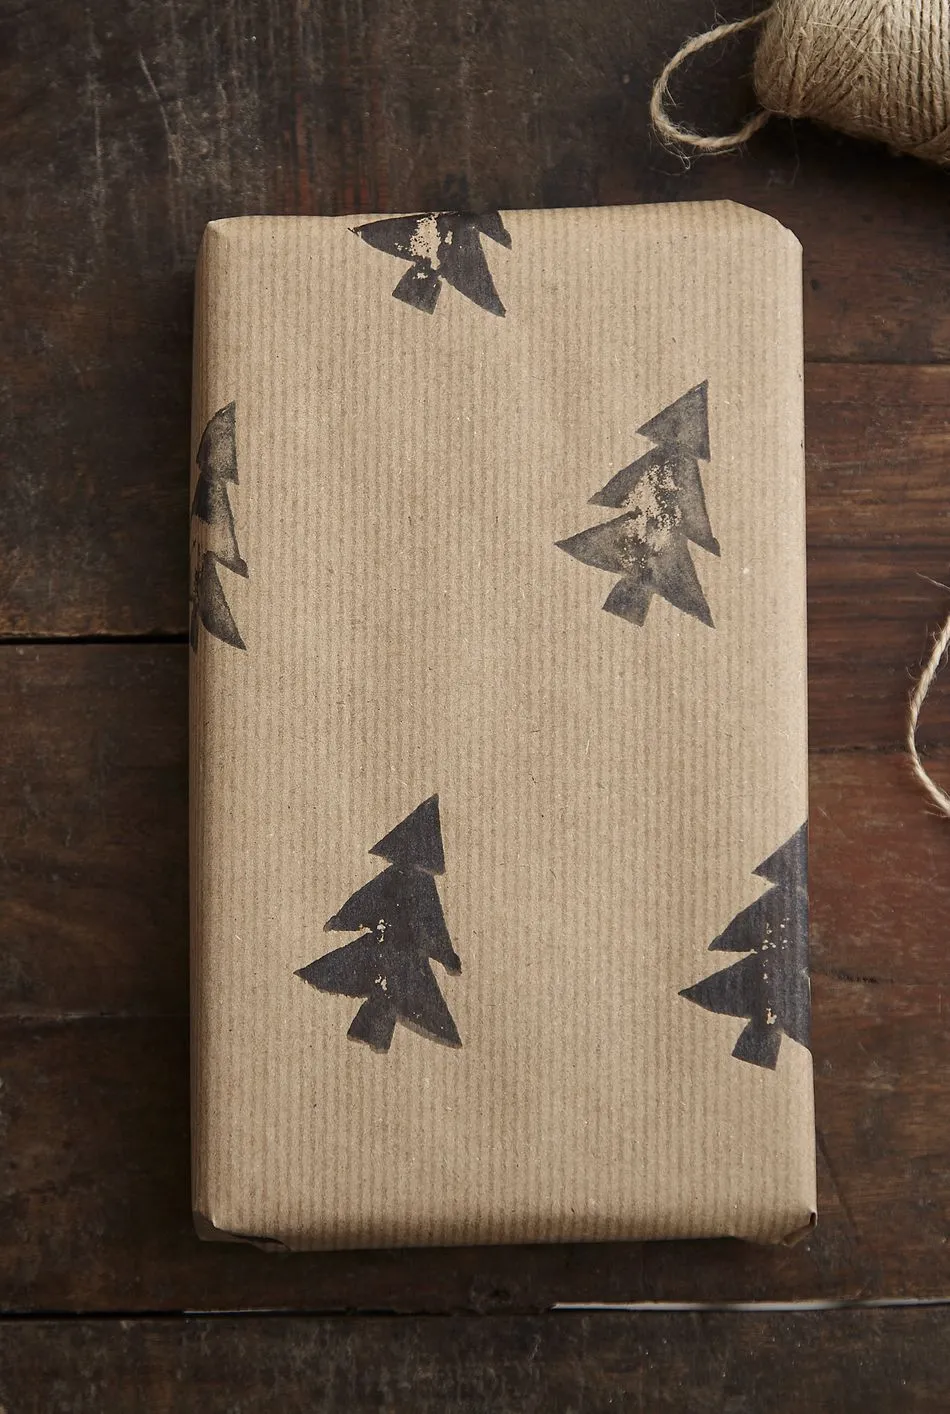 Kraft paper may also be used in this wrapping idea.